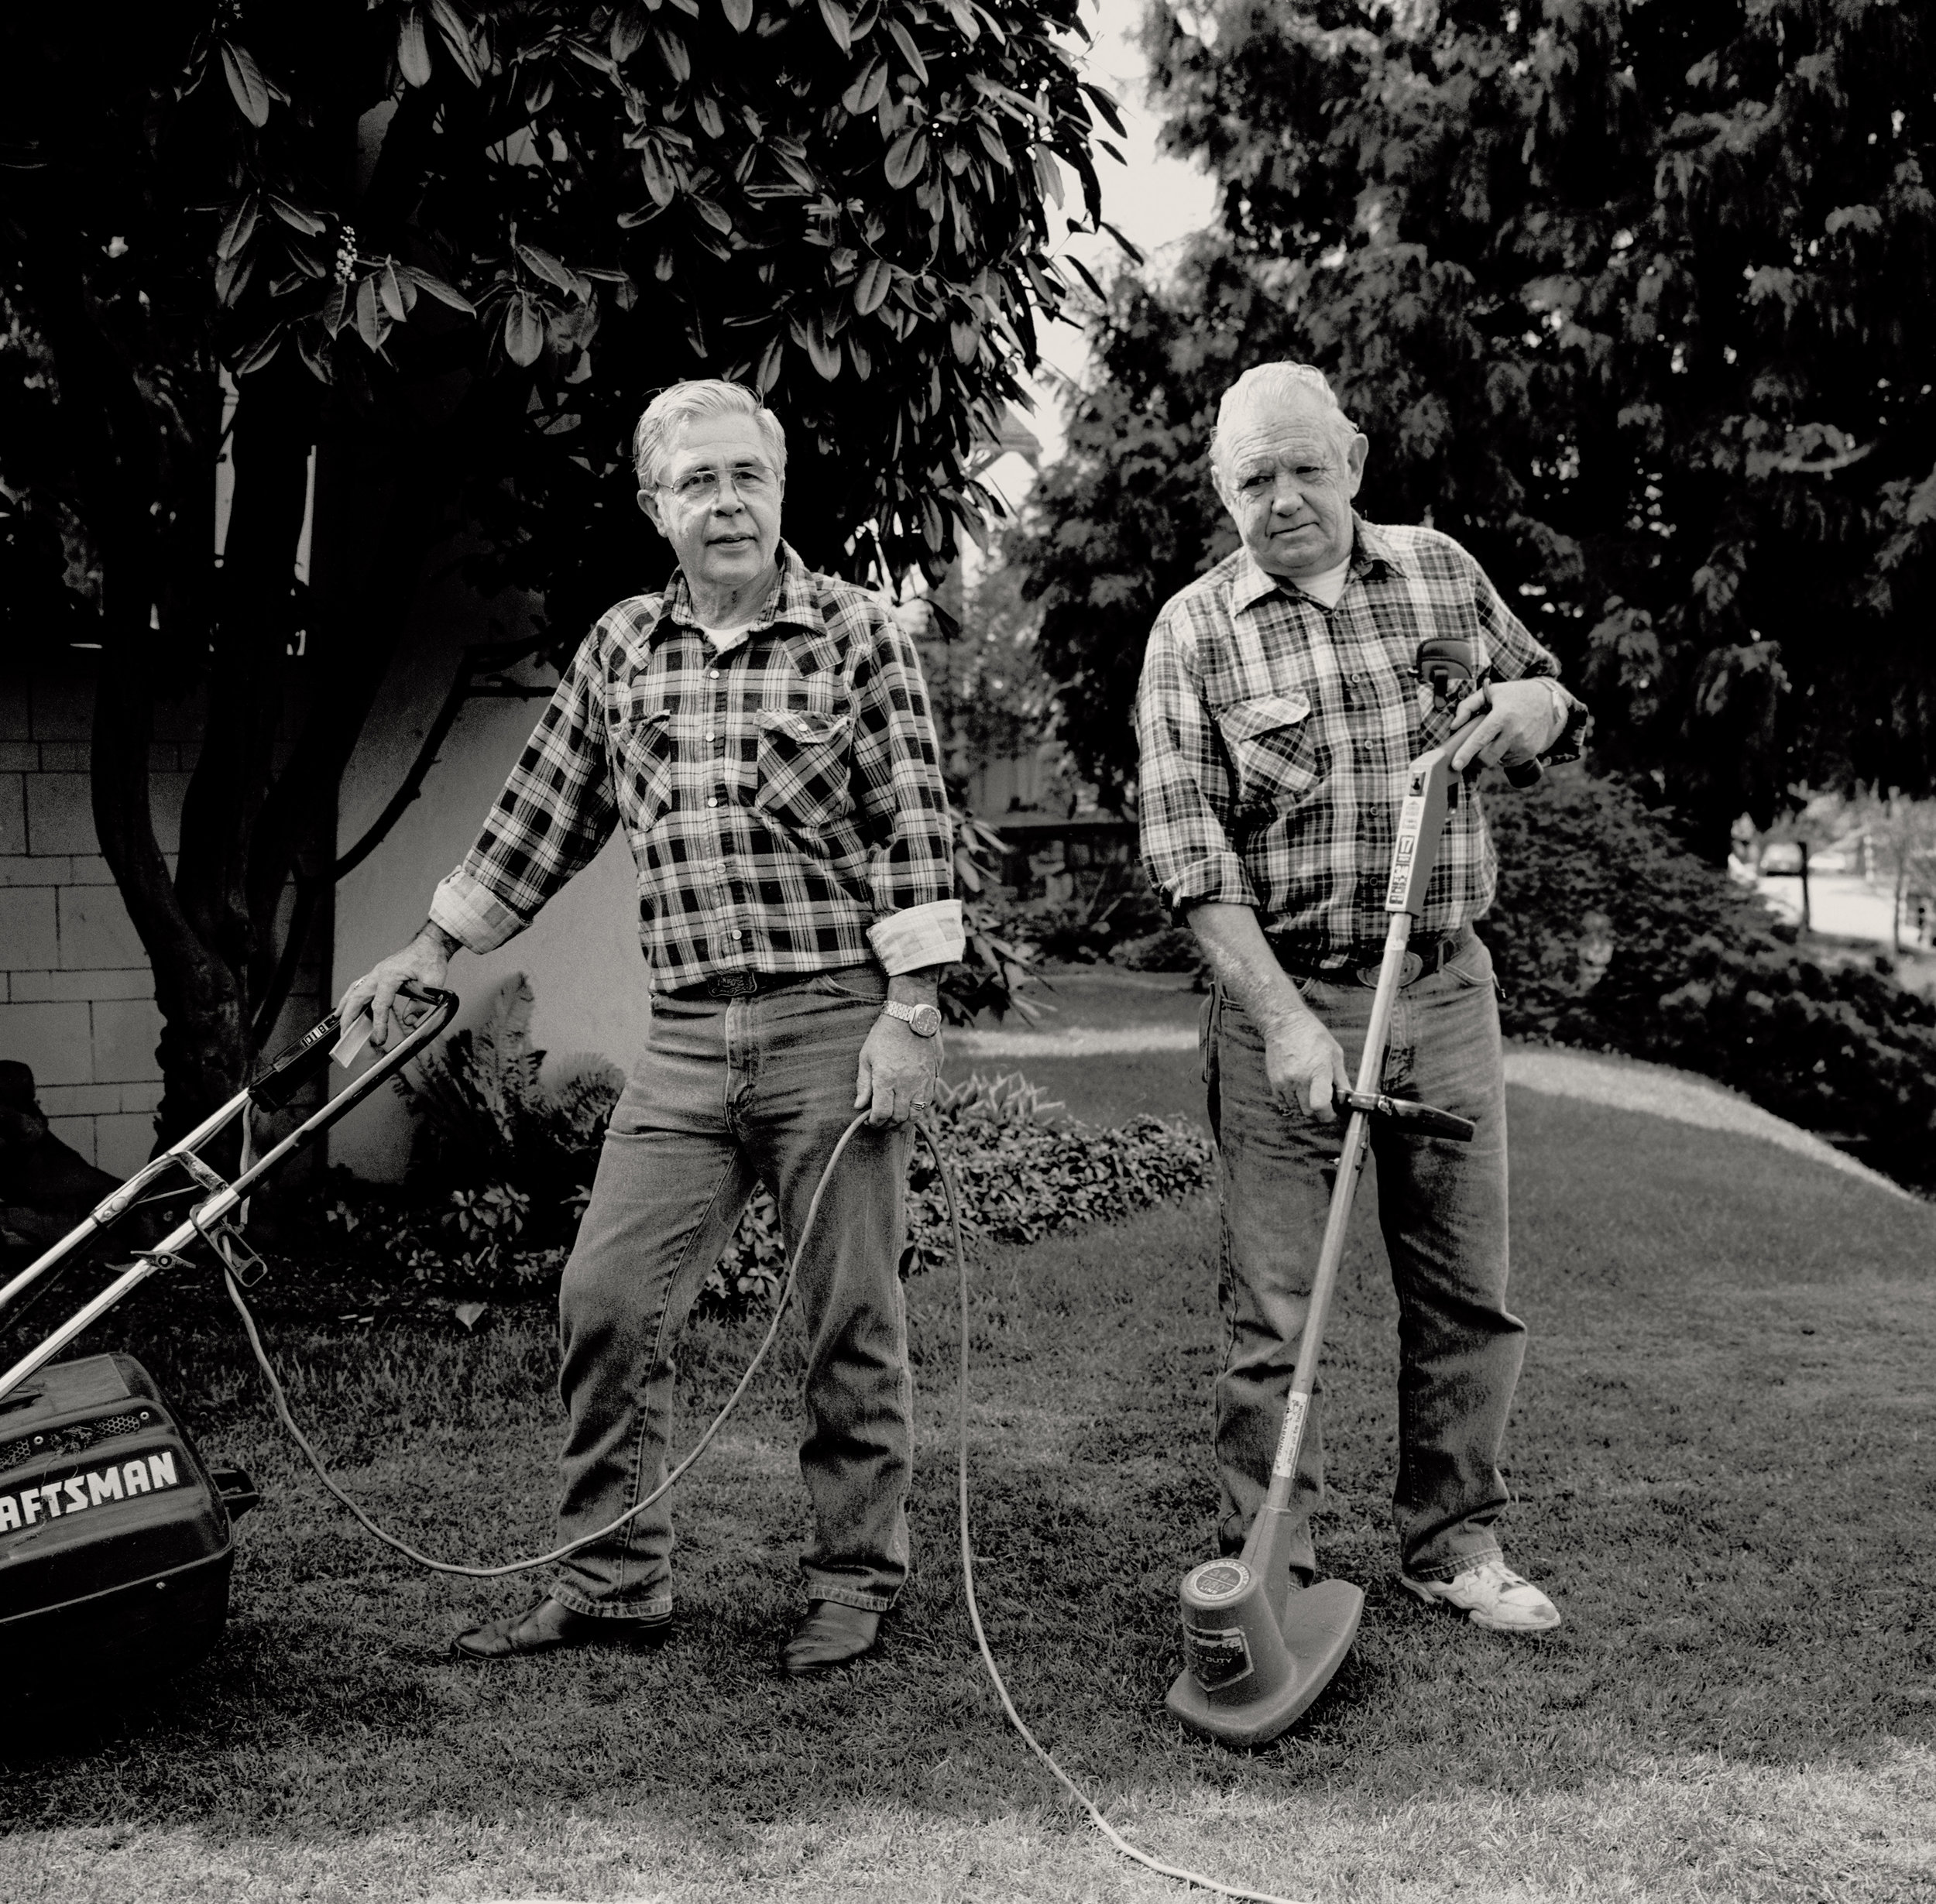 Men With Lawn Tools.jpg